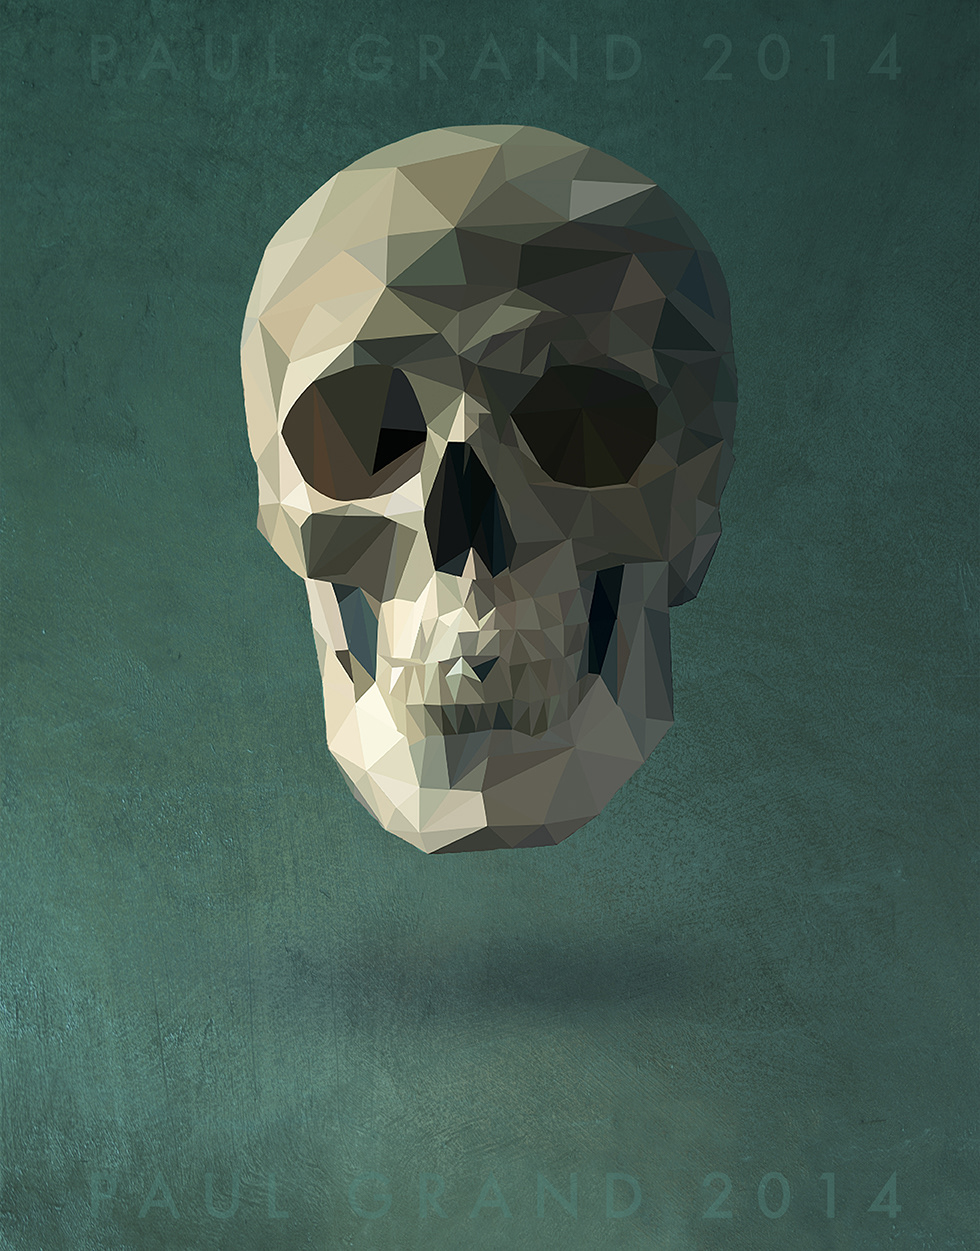 skull Low Poly Paul Grand PS ai Flypaper Textures Fly Nik Presets